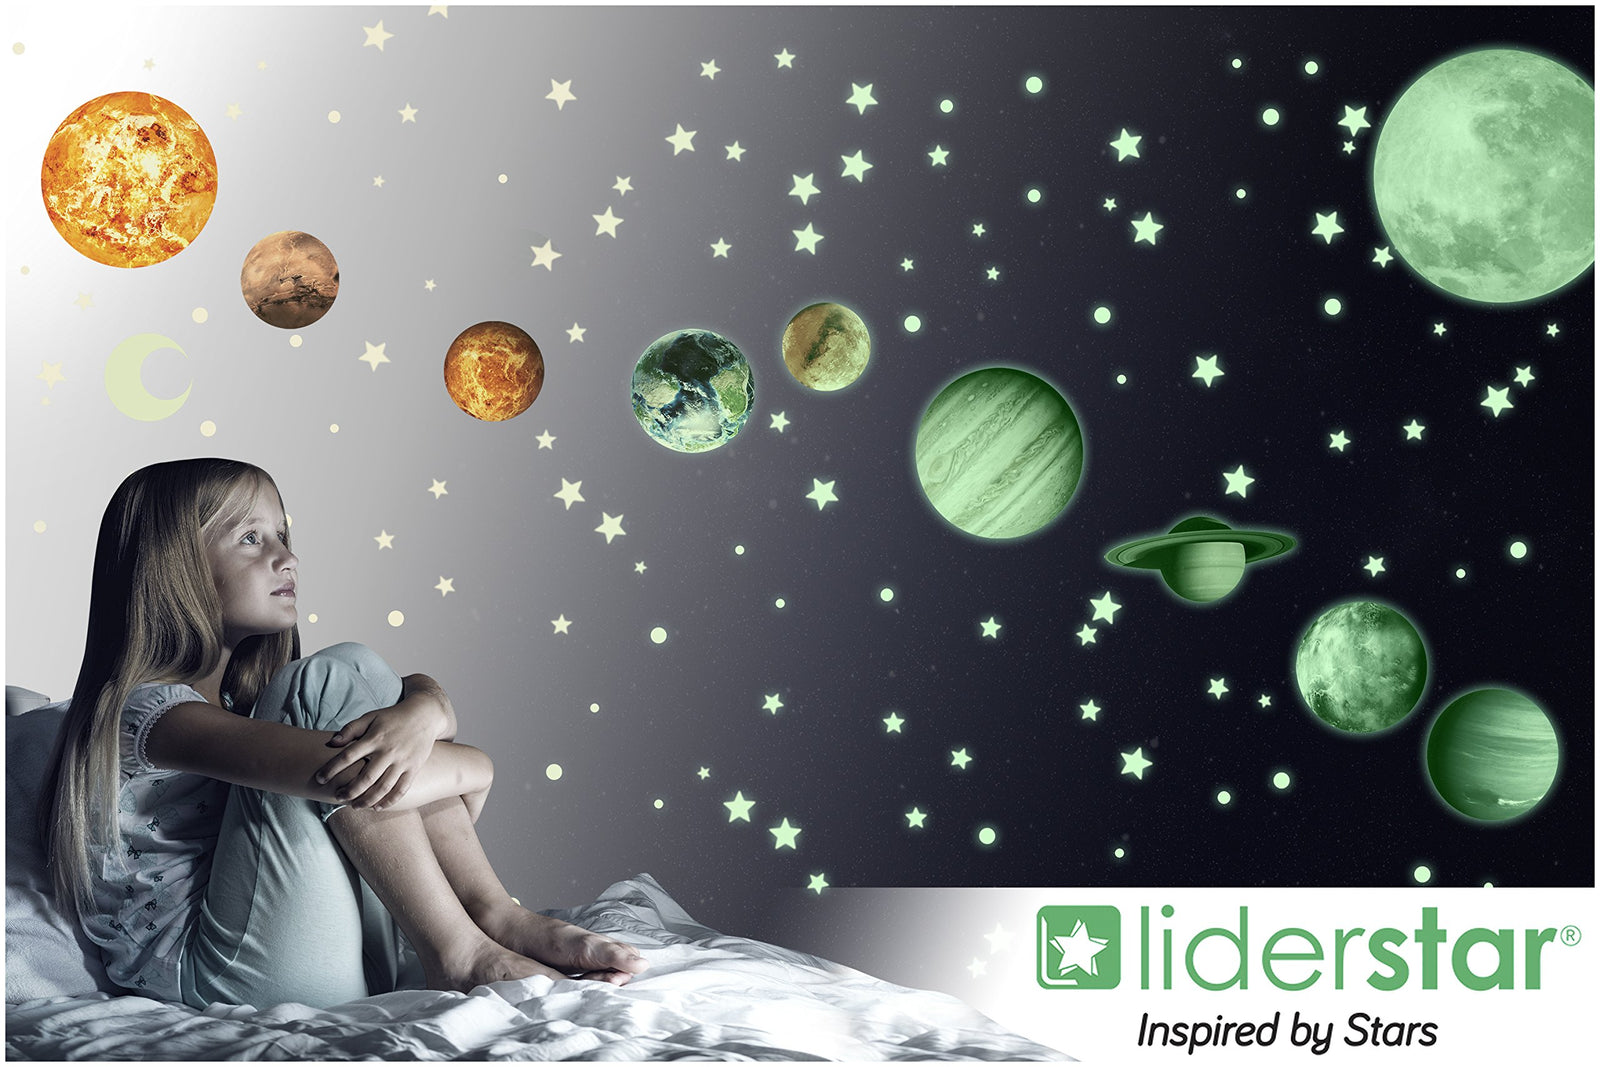 Glow in The Dark Stars and Planets, Bright Solar System Wall Stickers -Glowing Ceiling Decals for Kids Bedroom Any Room,Shining Space Decoration, Birthday Christmas Gift for Boys and Girls